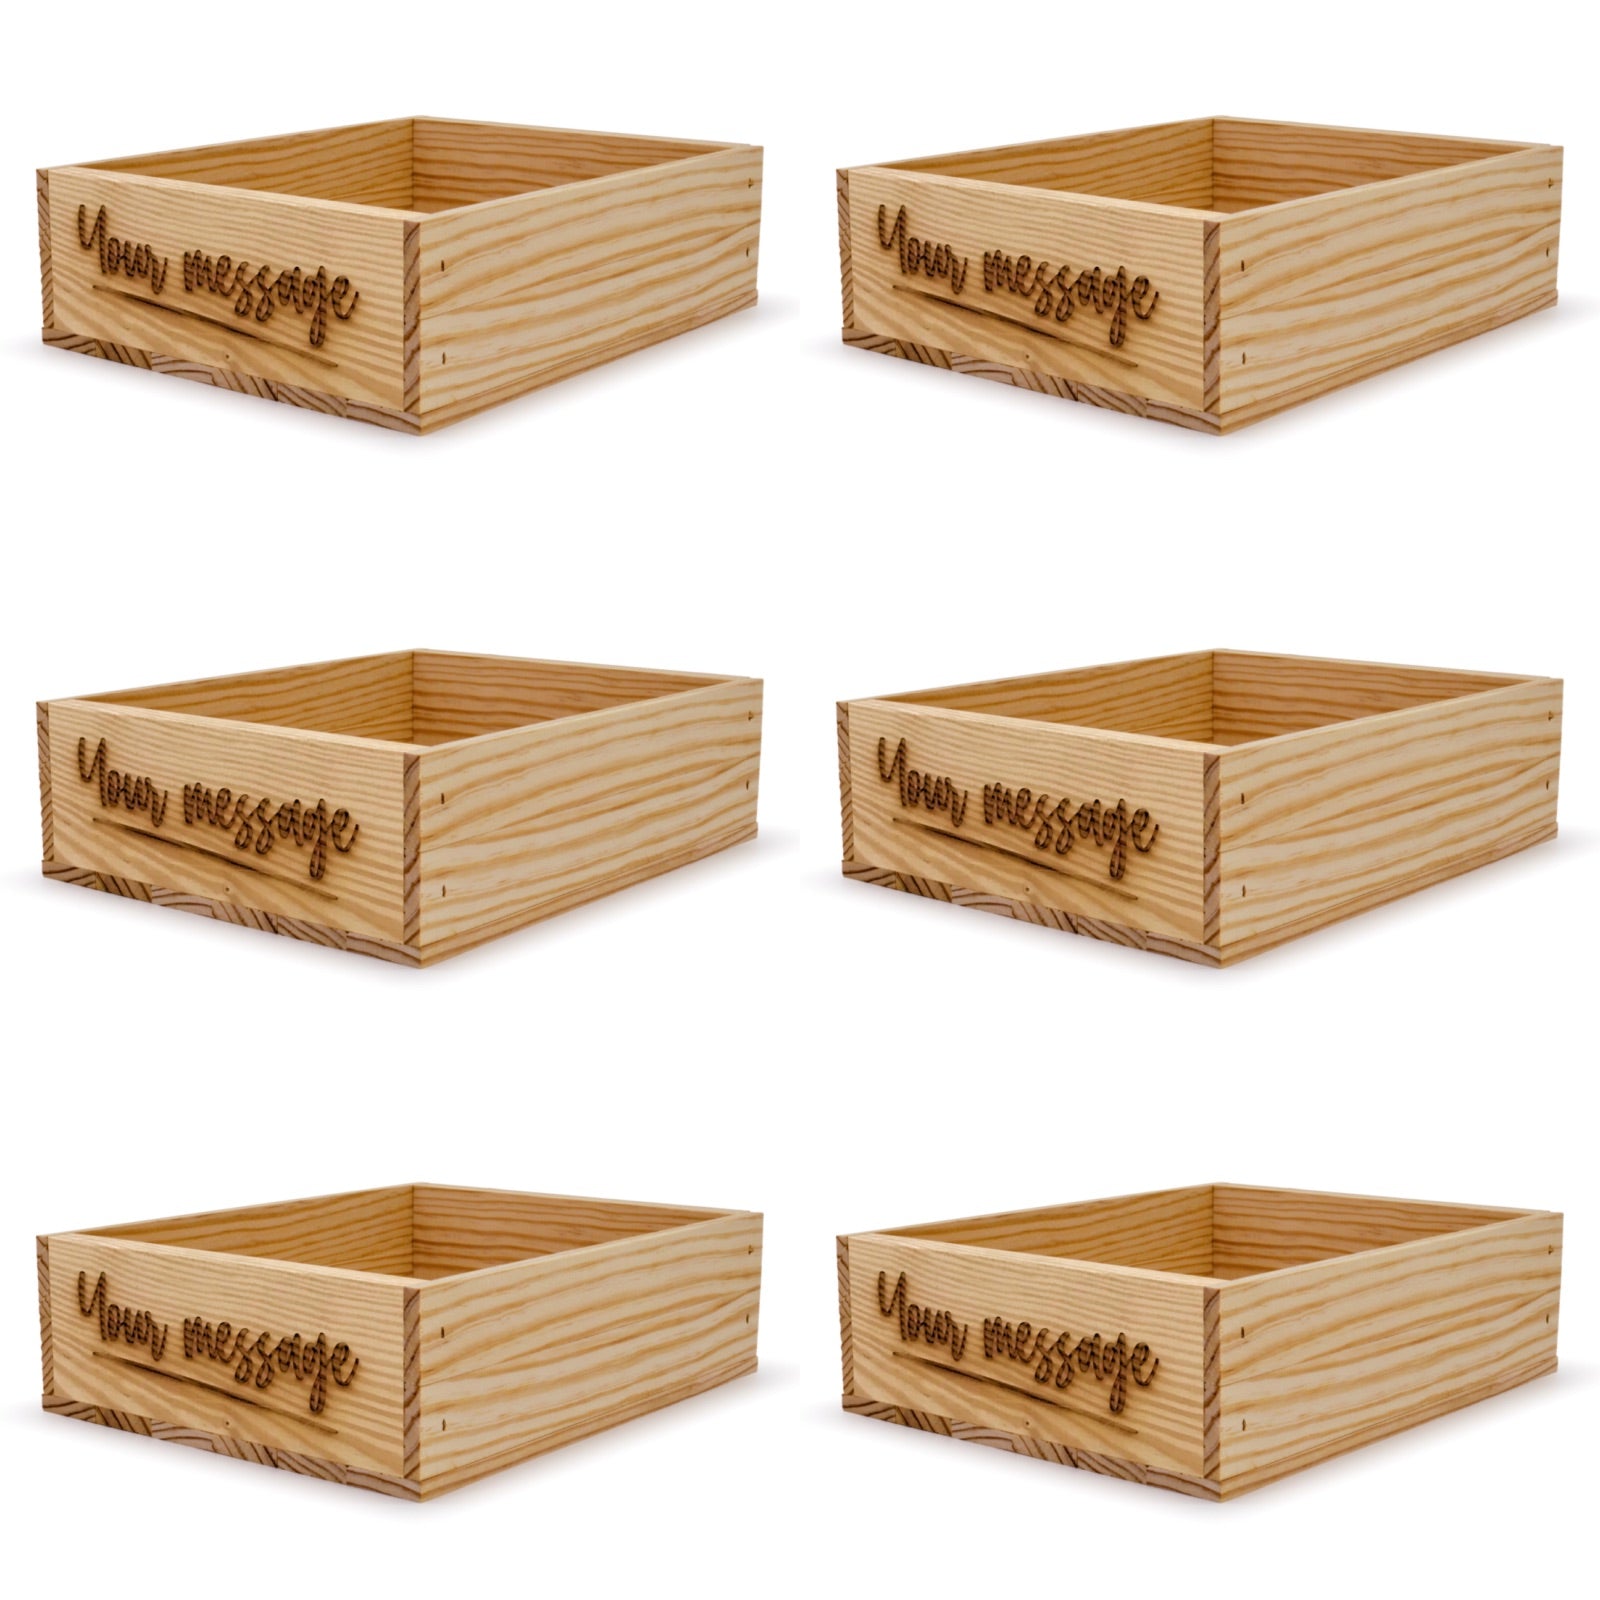 6 Small wooden crates with custom message 12x9.75x3.5